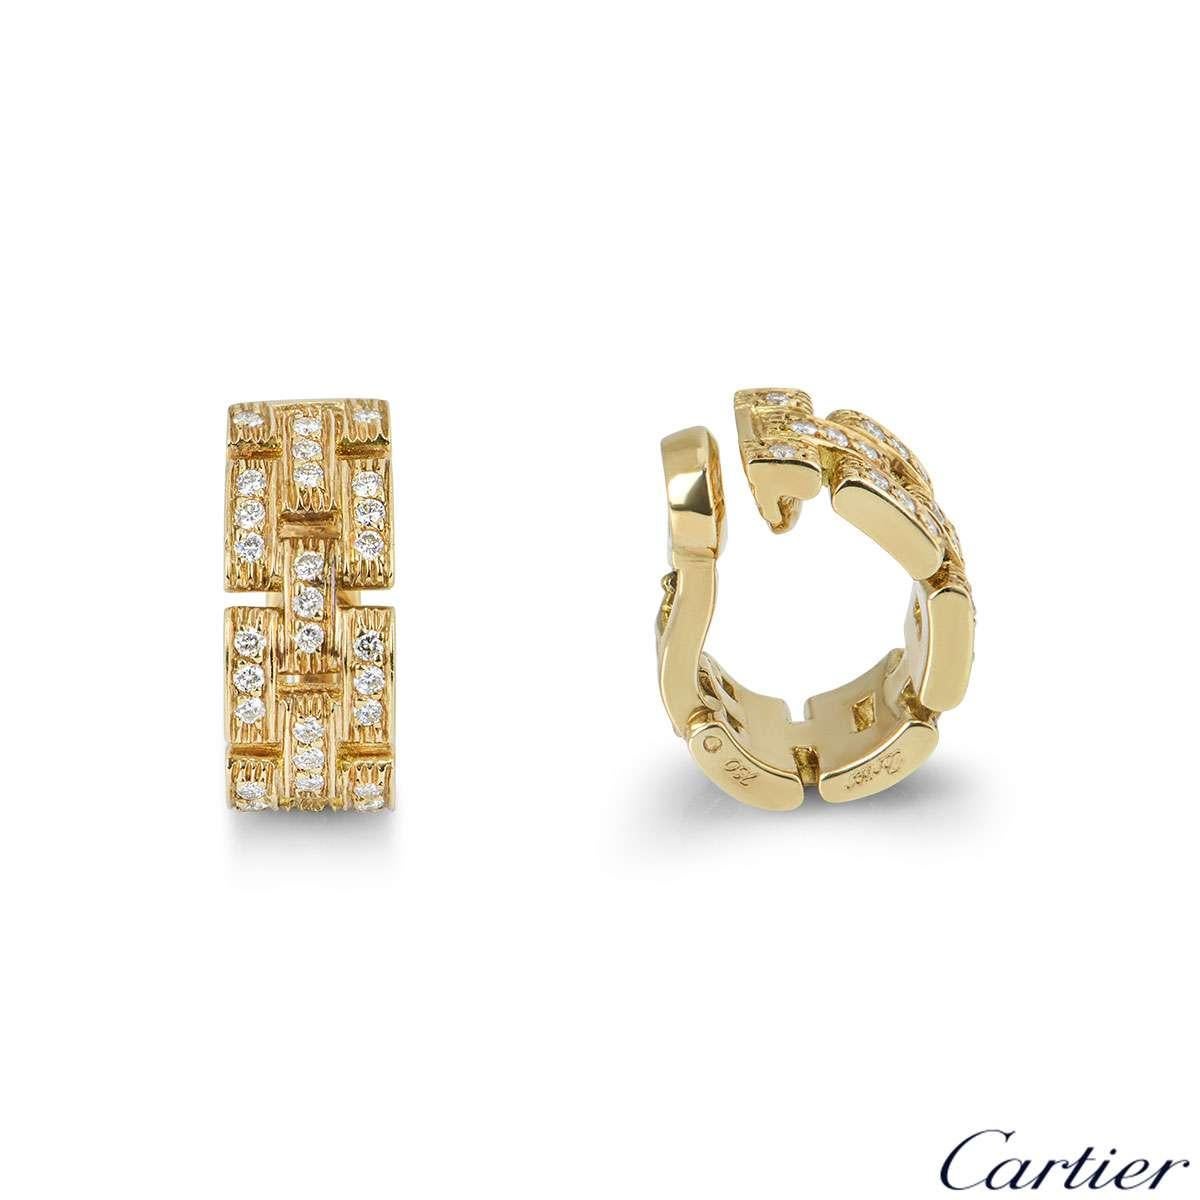 A pair of 18k yellow gold diamond hoop ear clips from the Maillon Panthere collection by Cartier. The hoop earrings feature brick style links each set with round brilliant cut diamonds totalling approximately 0.48ct. The earrings measure 7mm in